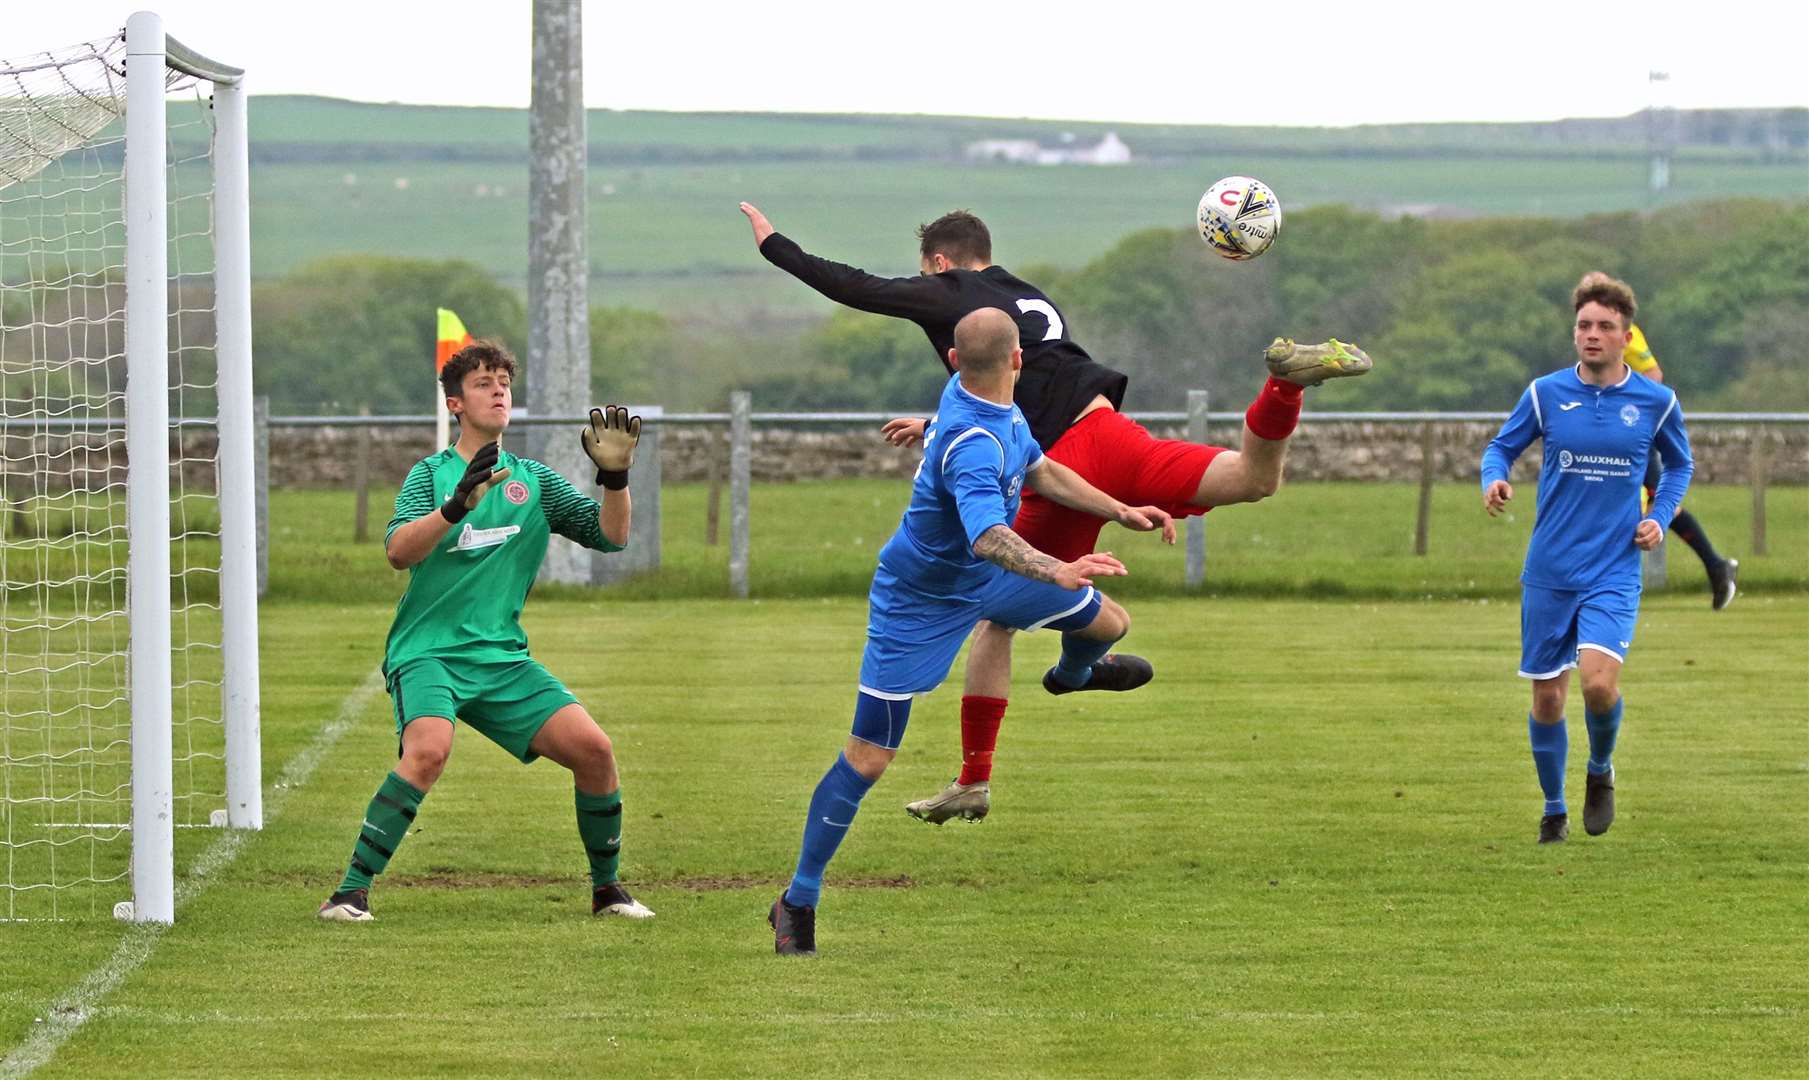 Halkirk United defender Ian Ross gets in a tangle with Golspie's Sean Munro as the Anglers' keeper Lewis Gallacher looks on. Picture: James Gunn